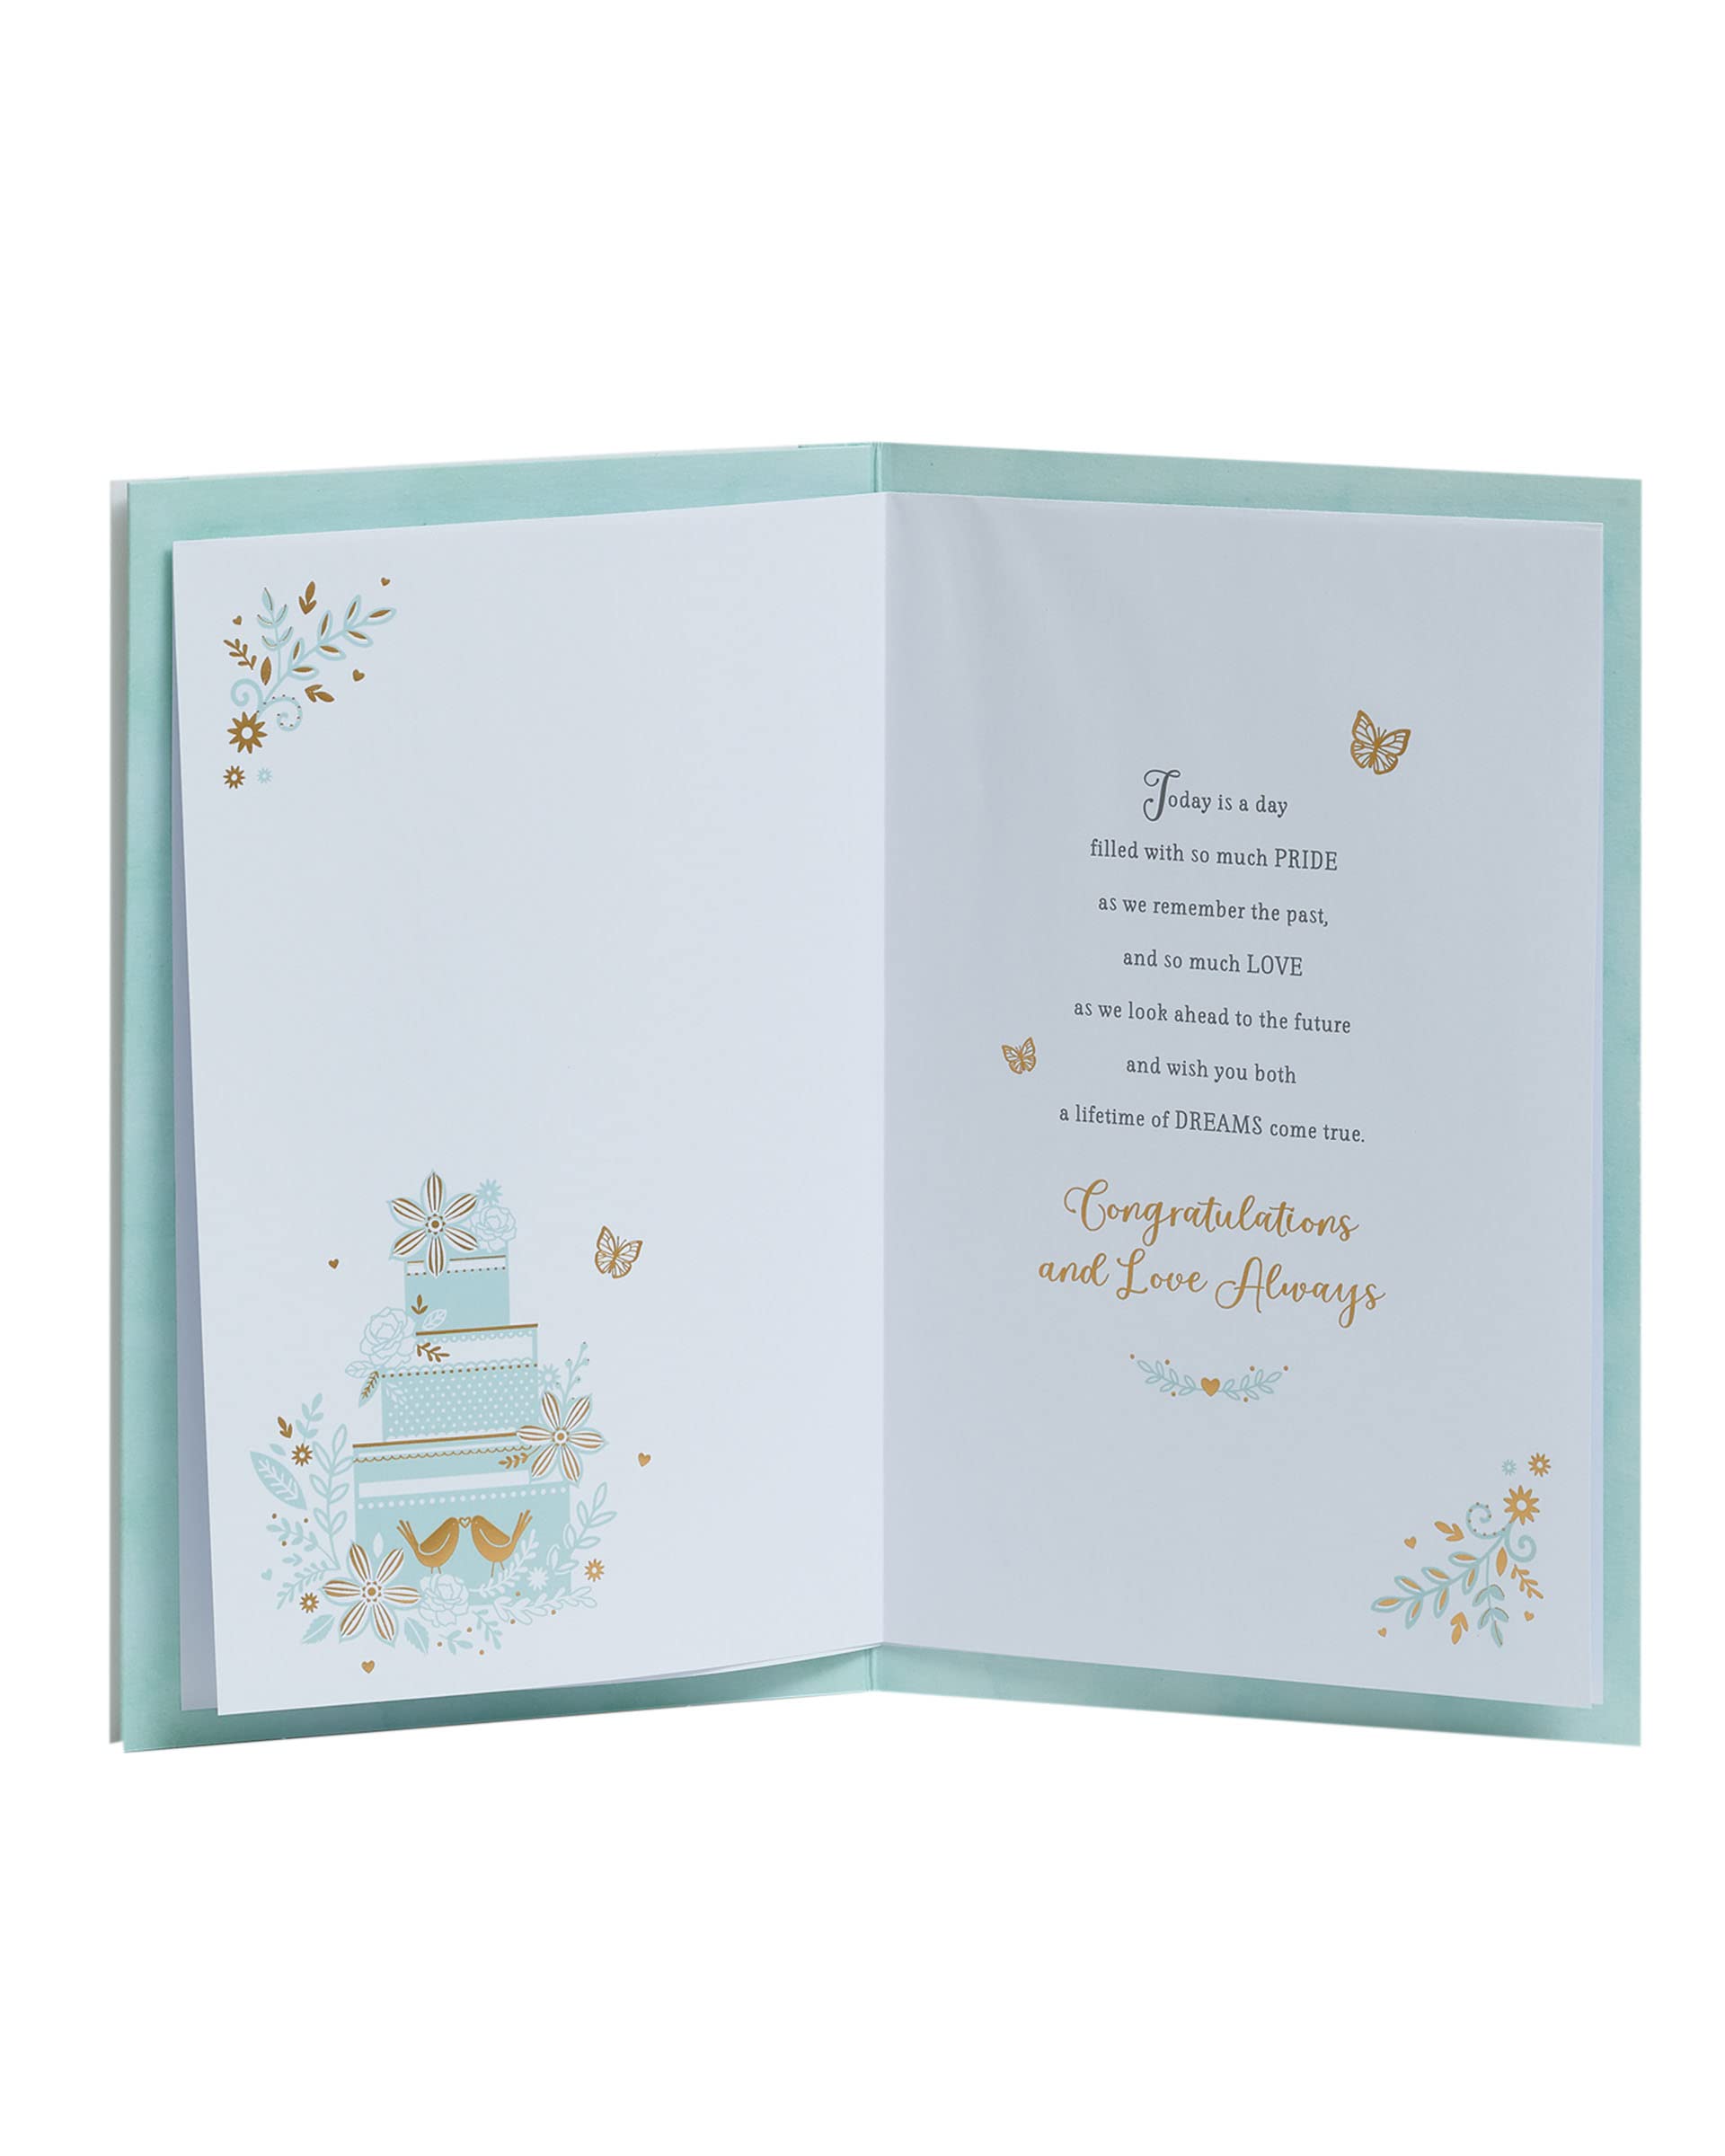 UK Greetings Son & Daughter-In-Law Wedding Card With Envelope - Pretty Cake Design